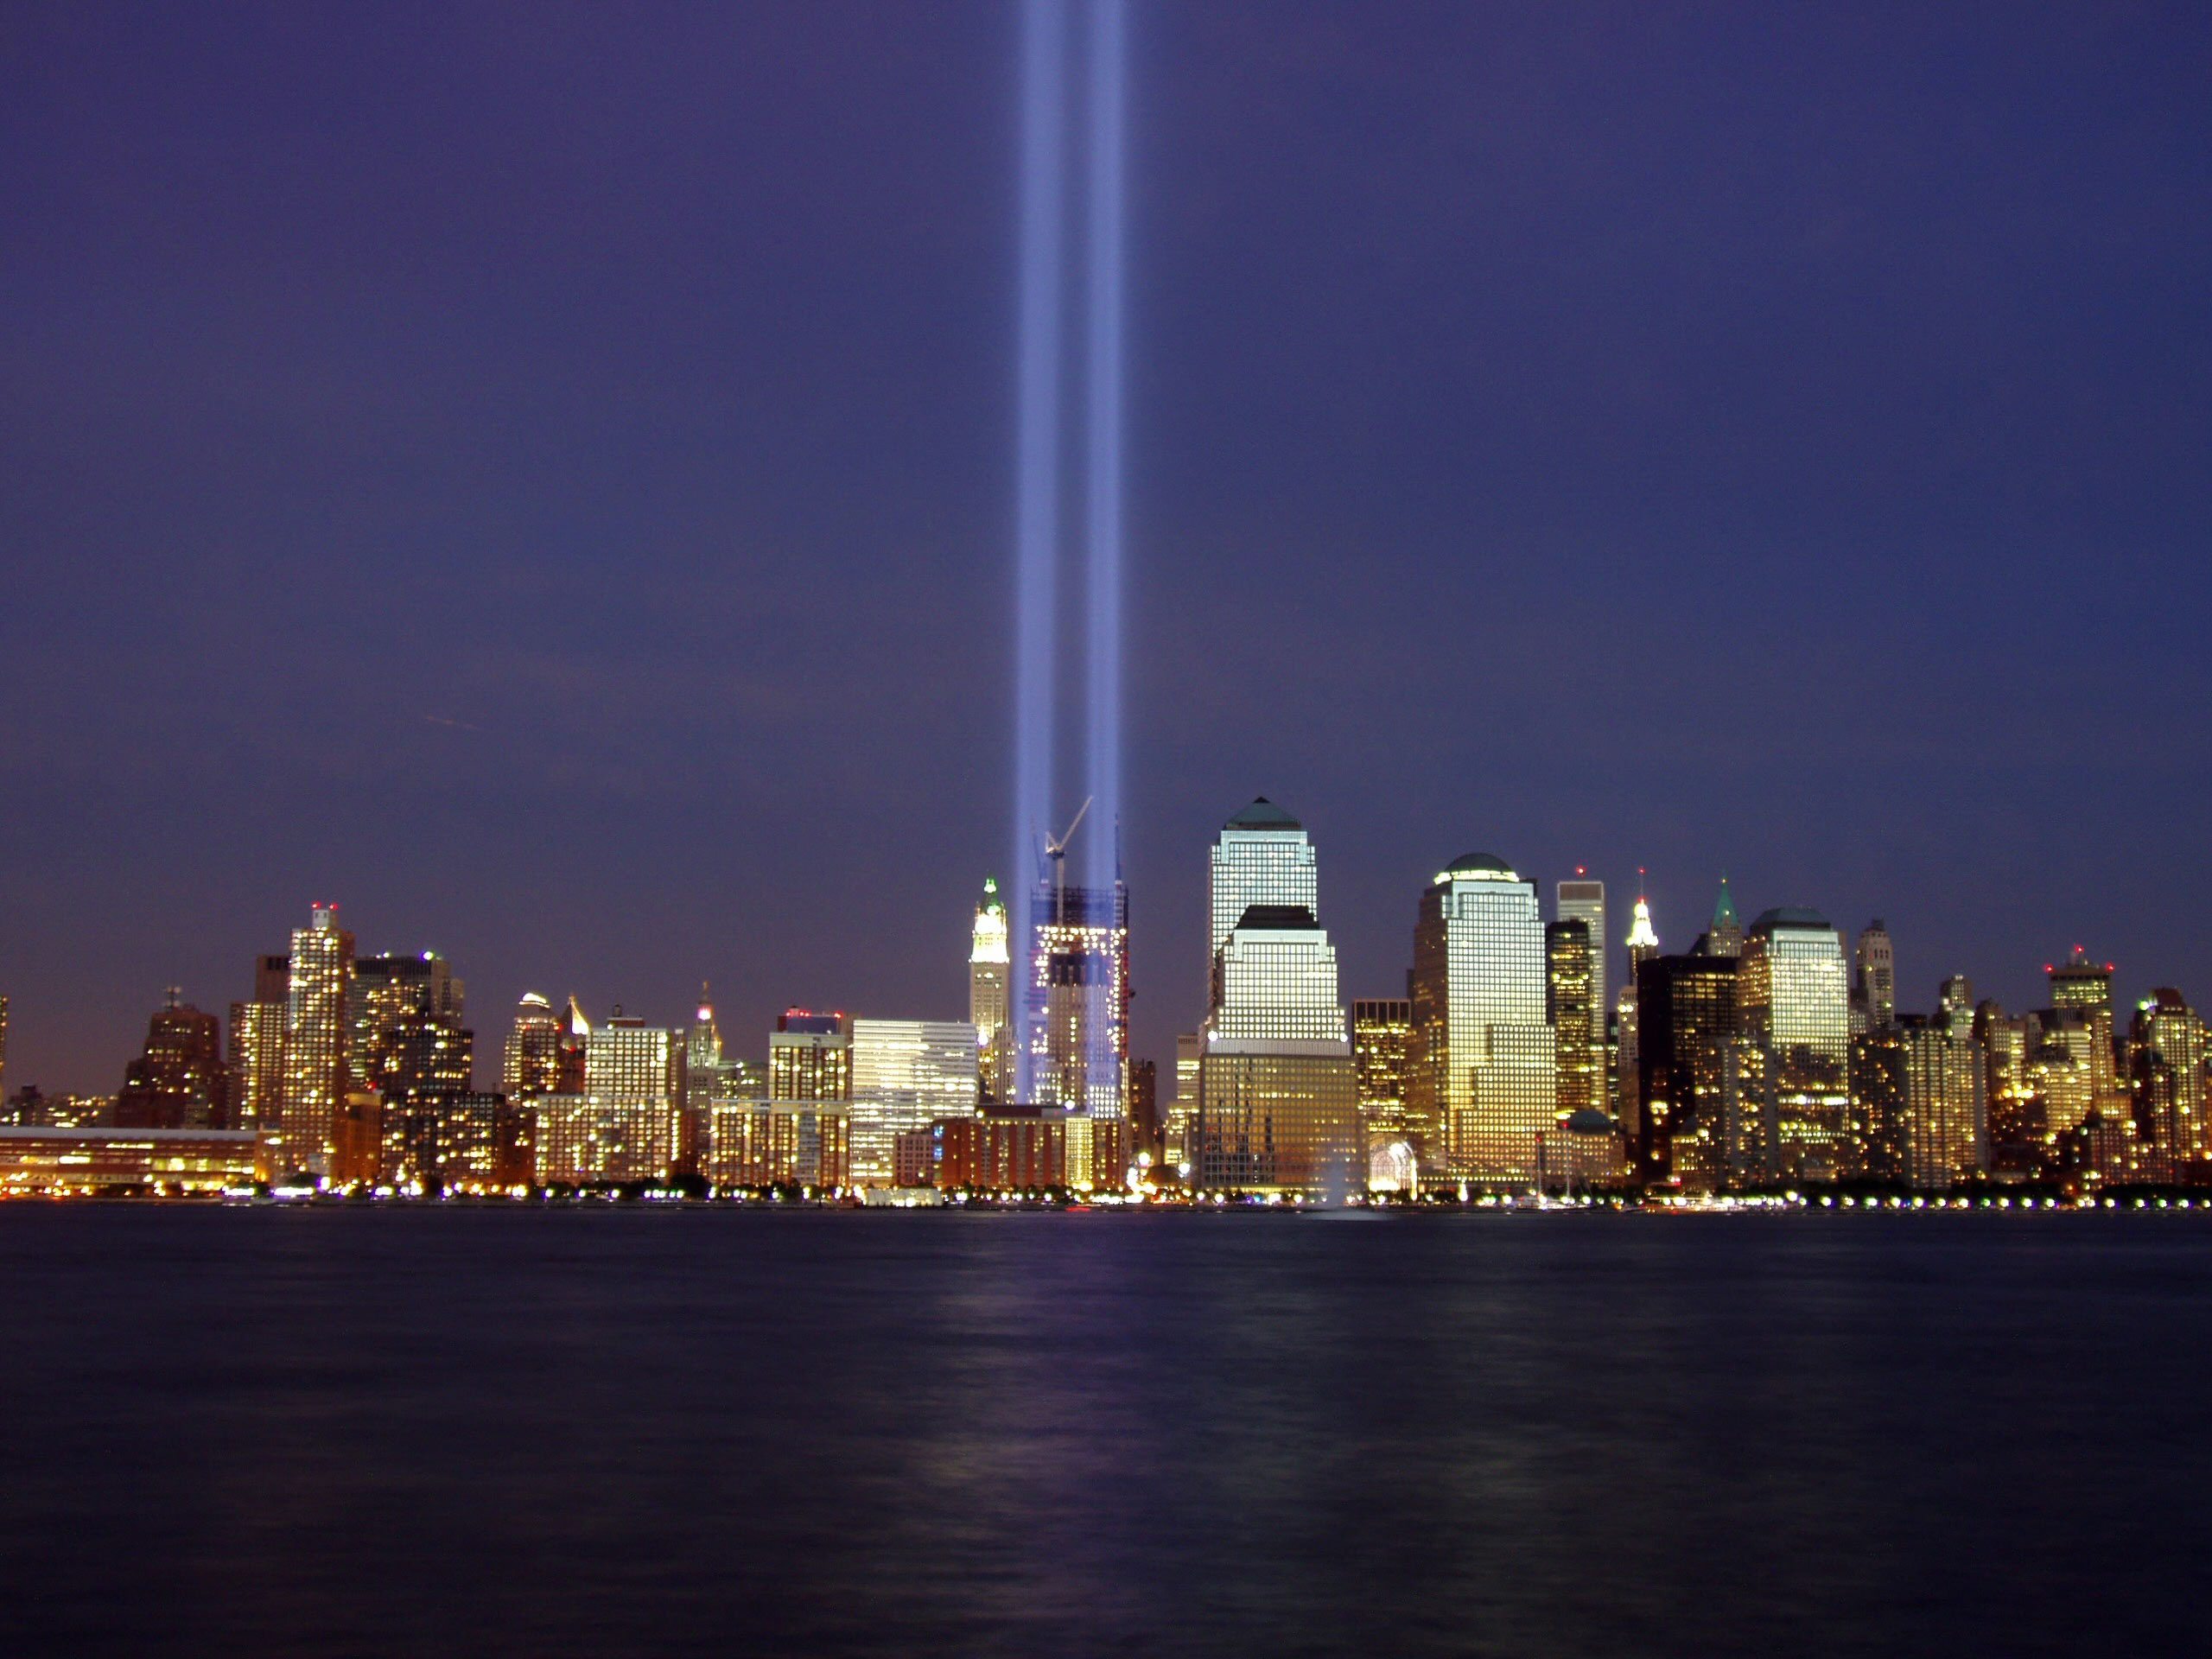 A September 11th Remembrance